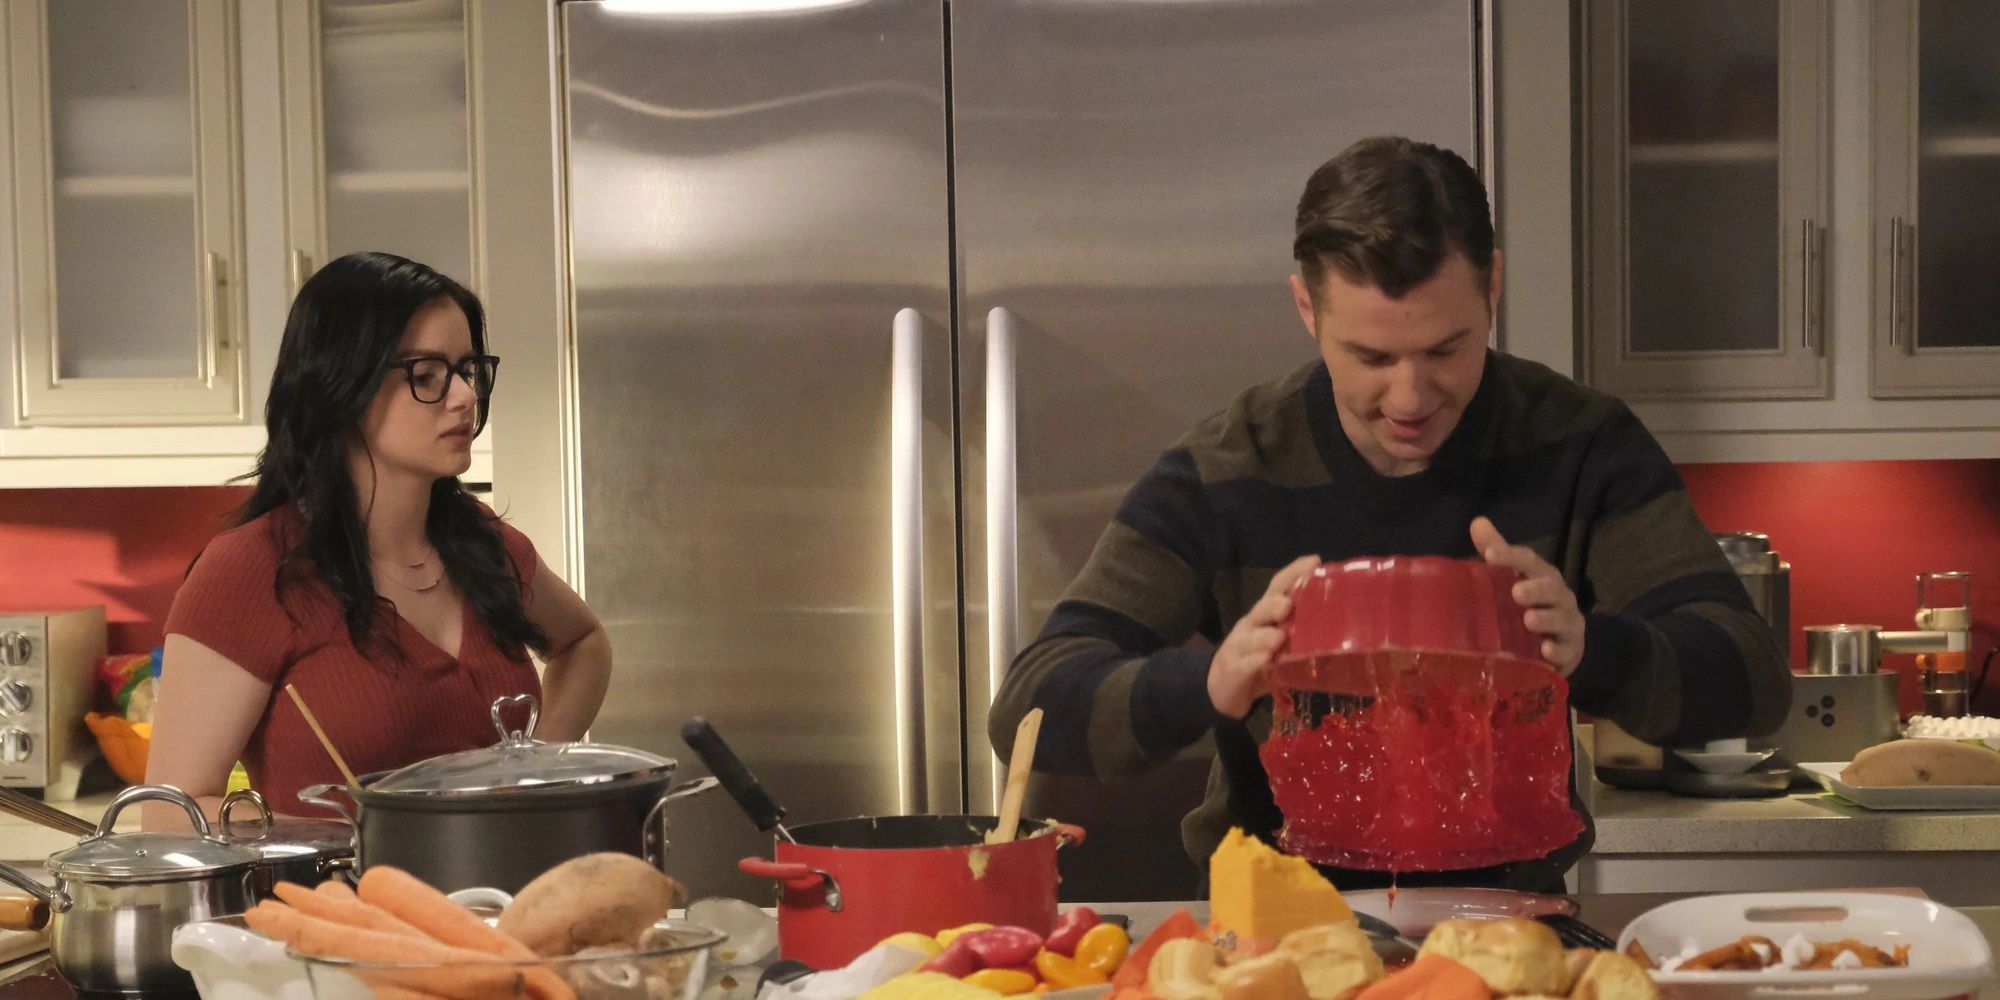 Alex and Luke helping with the kitchen in Modern Family